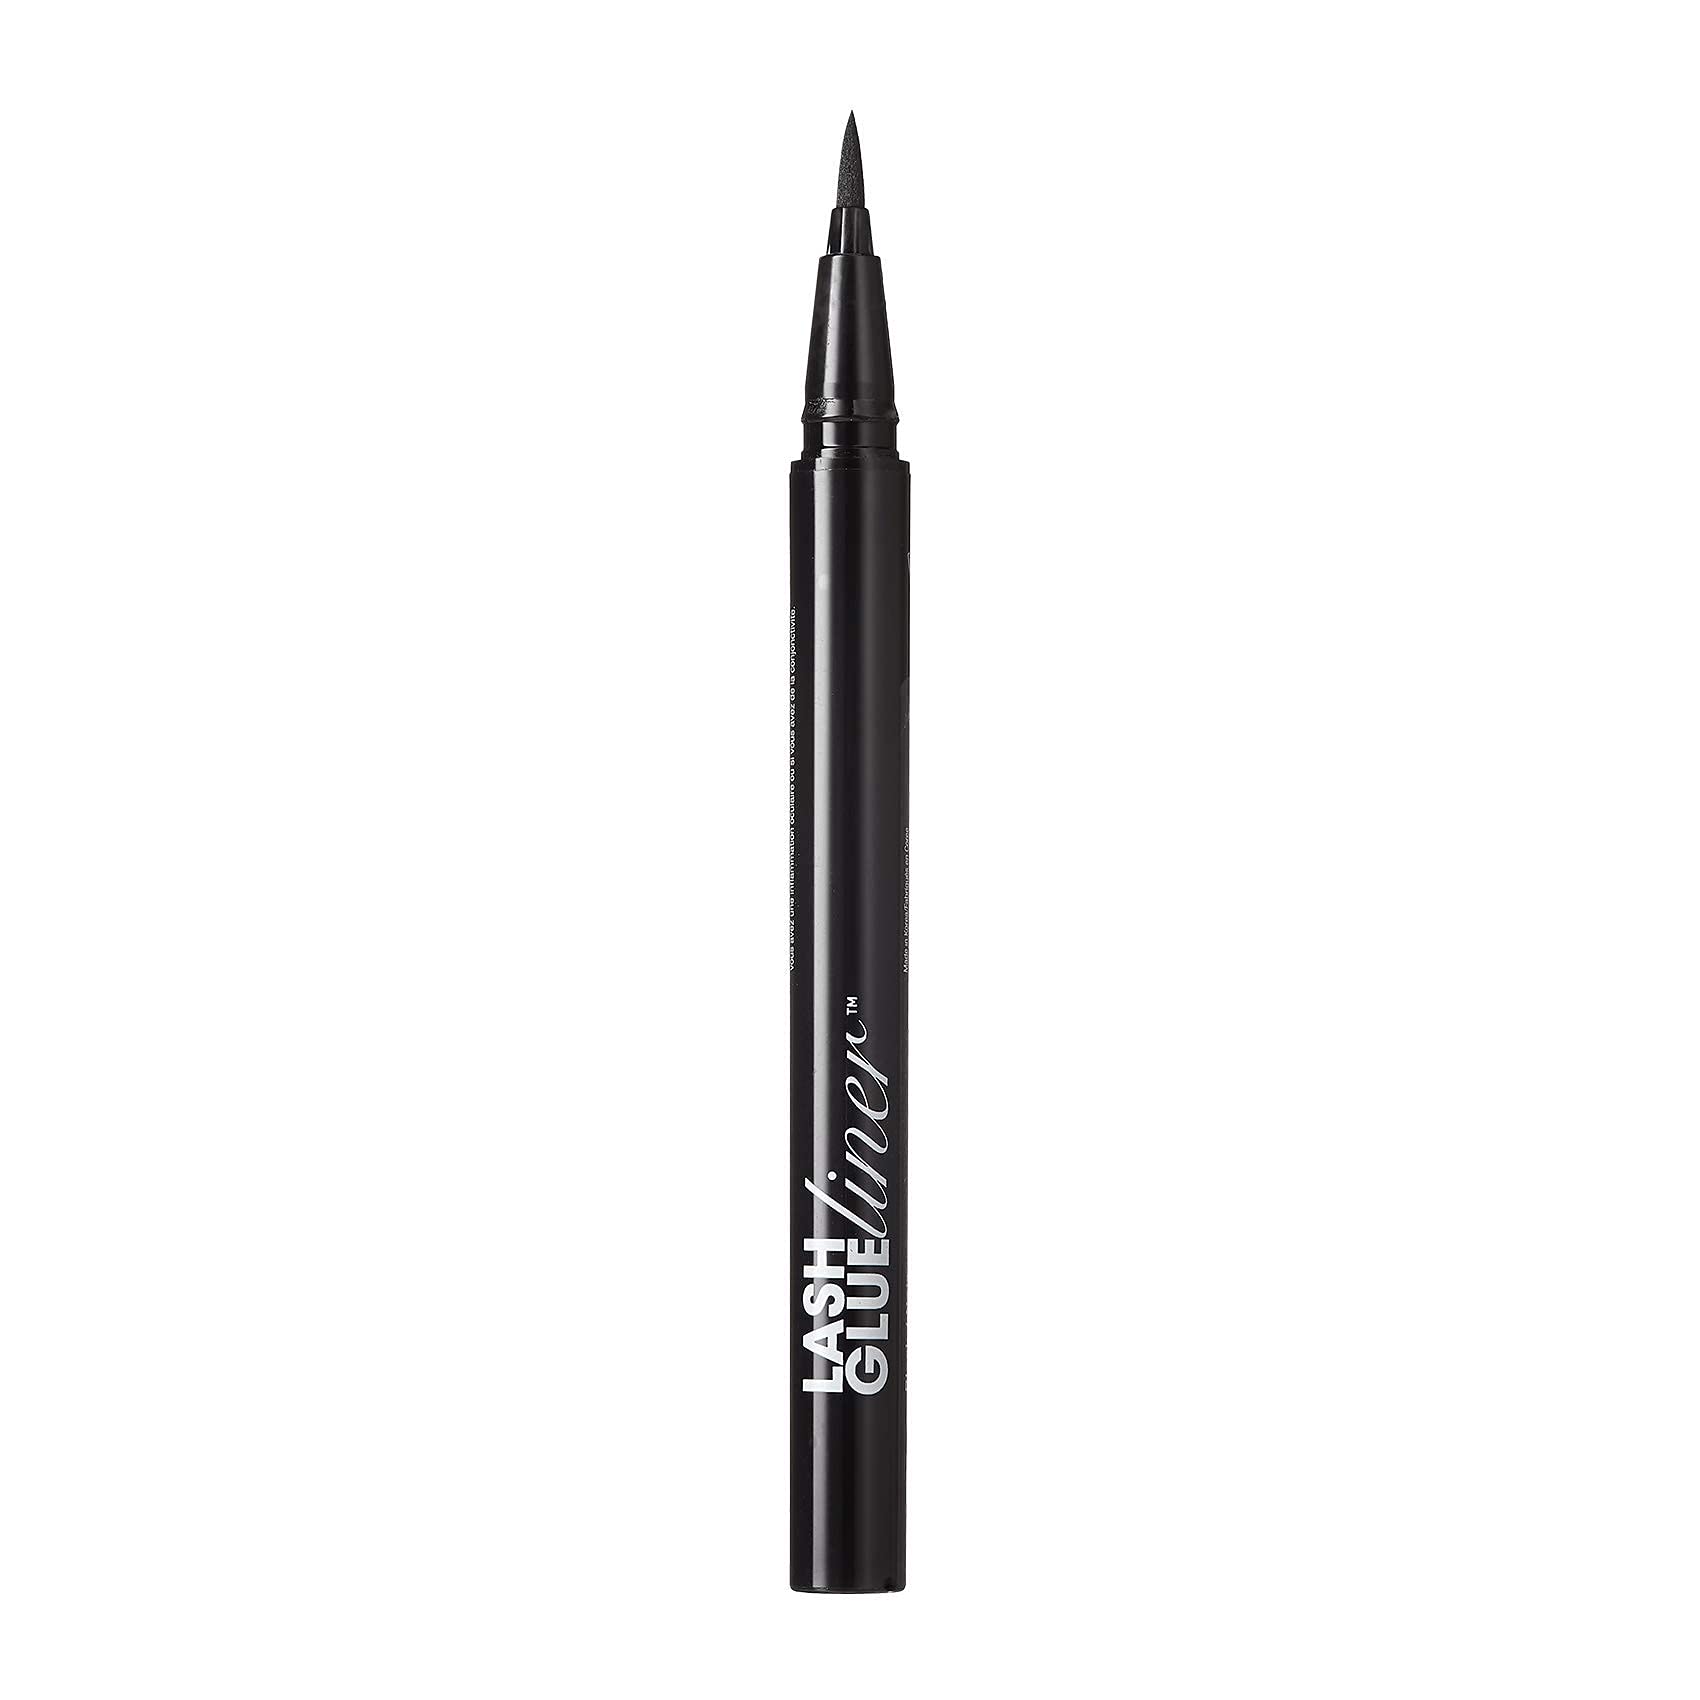 KISS Black Lash GLUEliner, 2-in-1 Felt-Tip Eyelash Adhesive and Eyeliner, Matte Finish, Foolproof Application, Easy Touch-Up, 0.02 Oz.